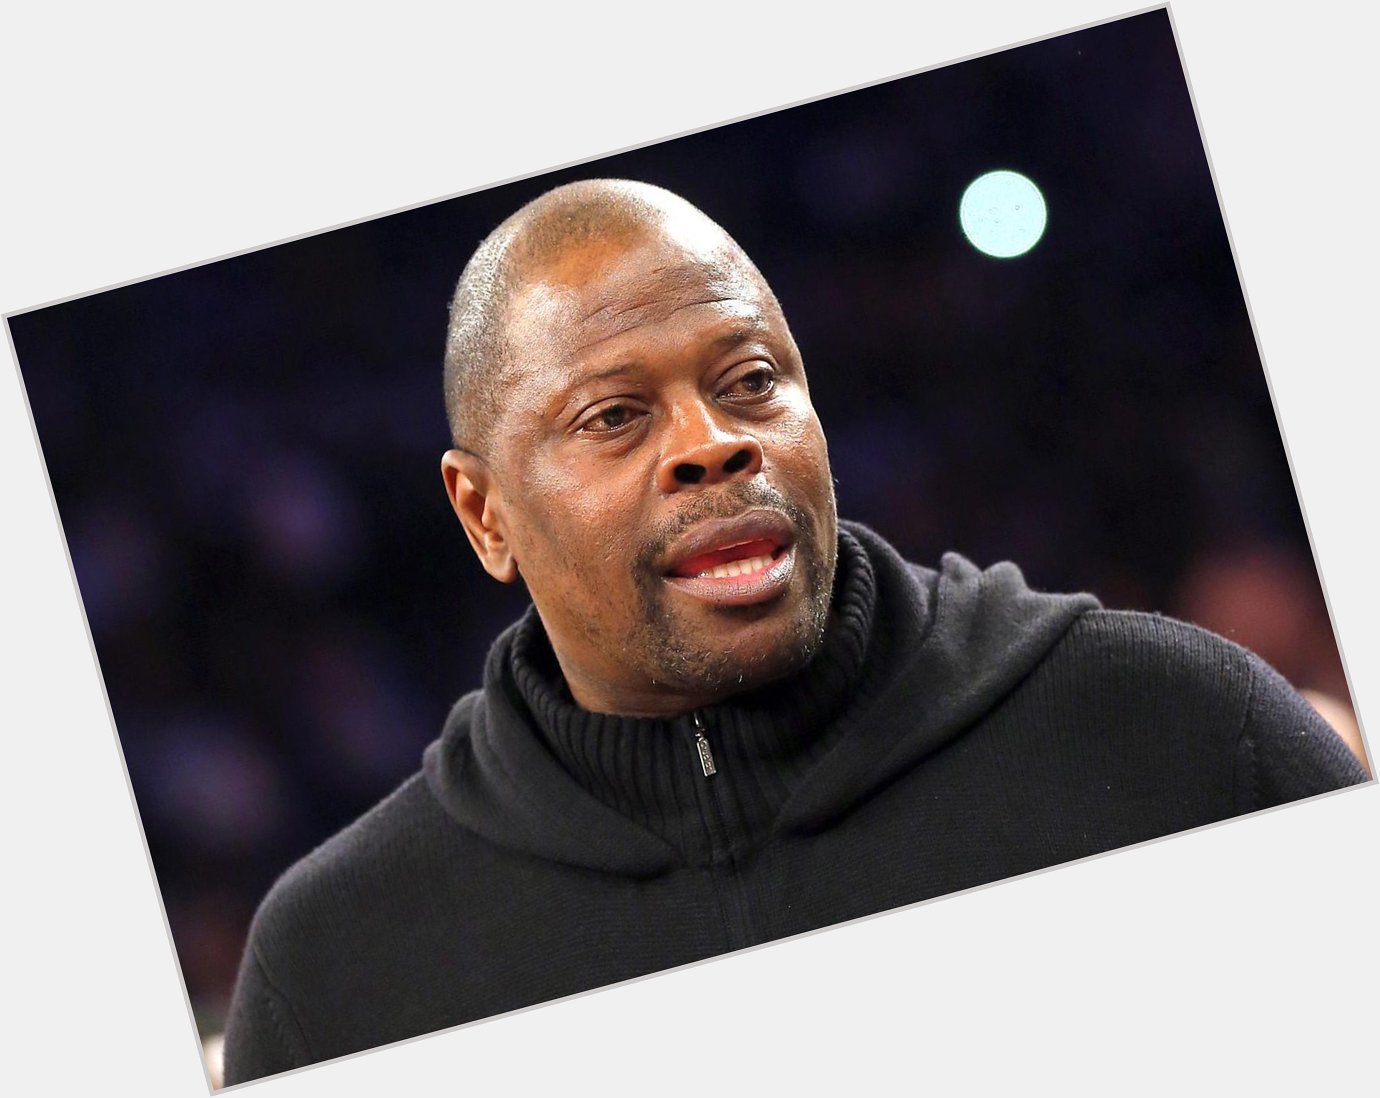 Happy 53rd, Patrick Ewing. We share a birthday, though there is little comparison between us as fearsome post players 